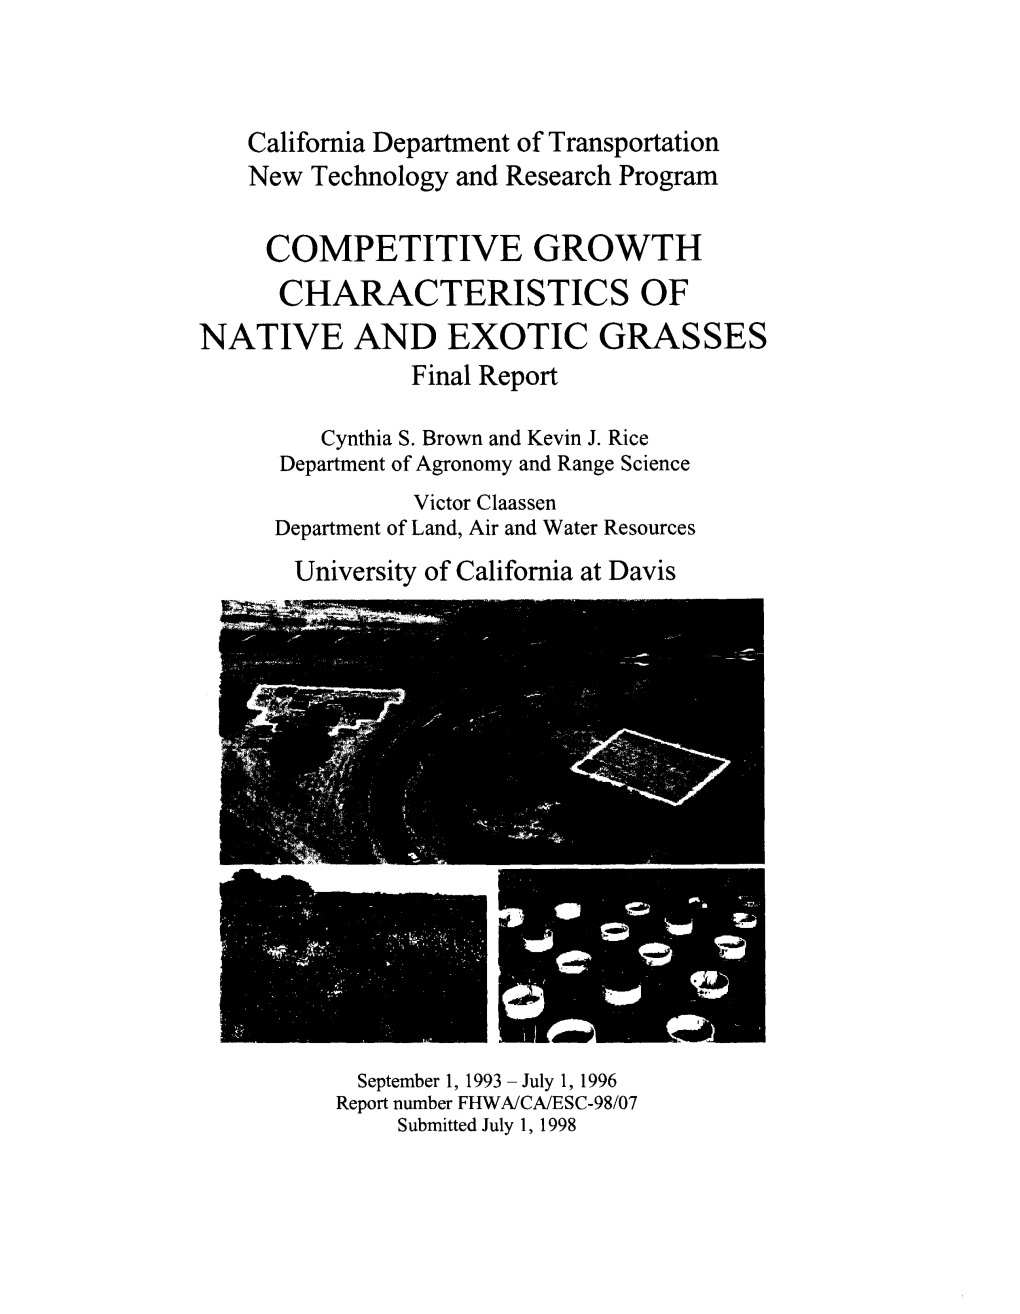 COMPETITIVE GROWTH CHARACTERISTICS of NATIVE and EXOTIC GRASSES Final Report